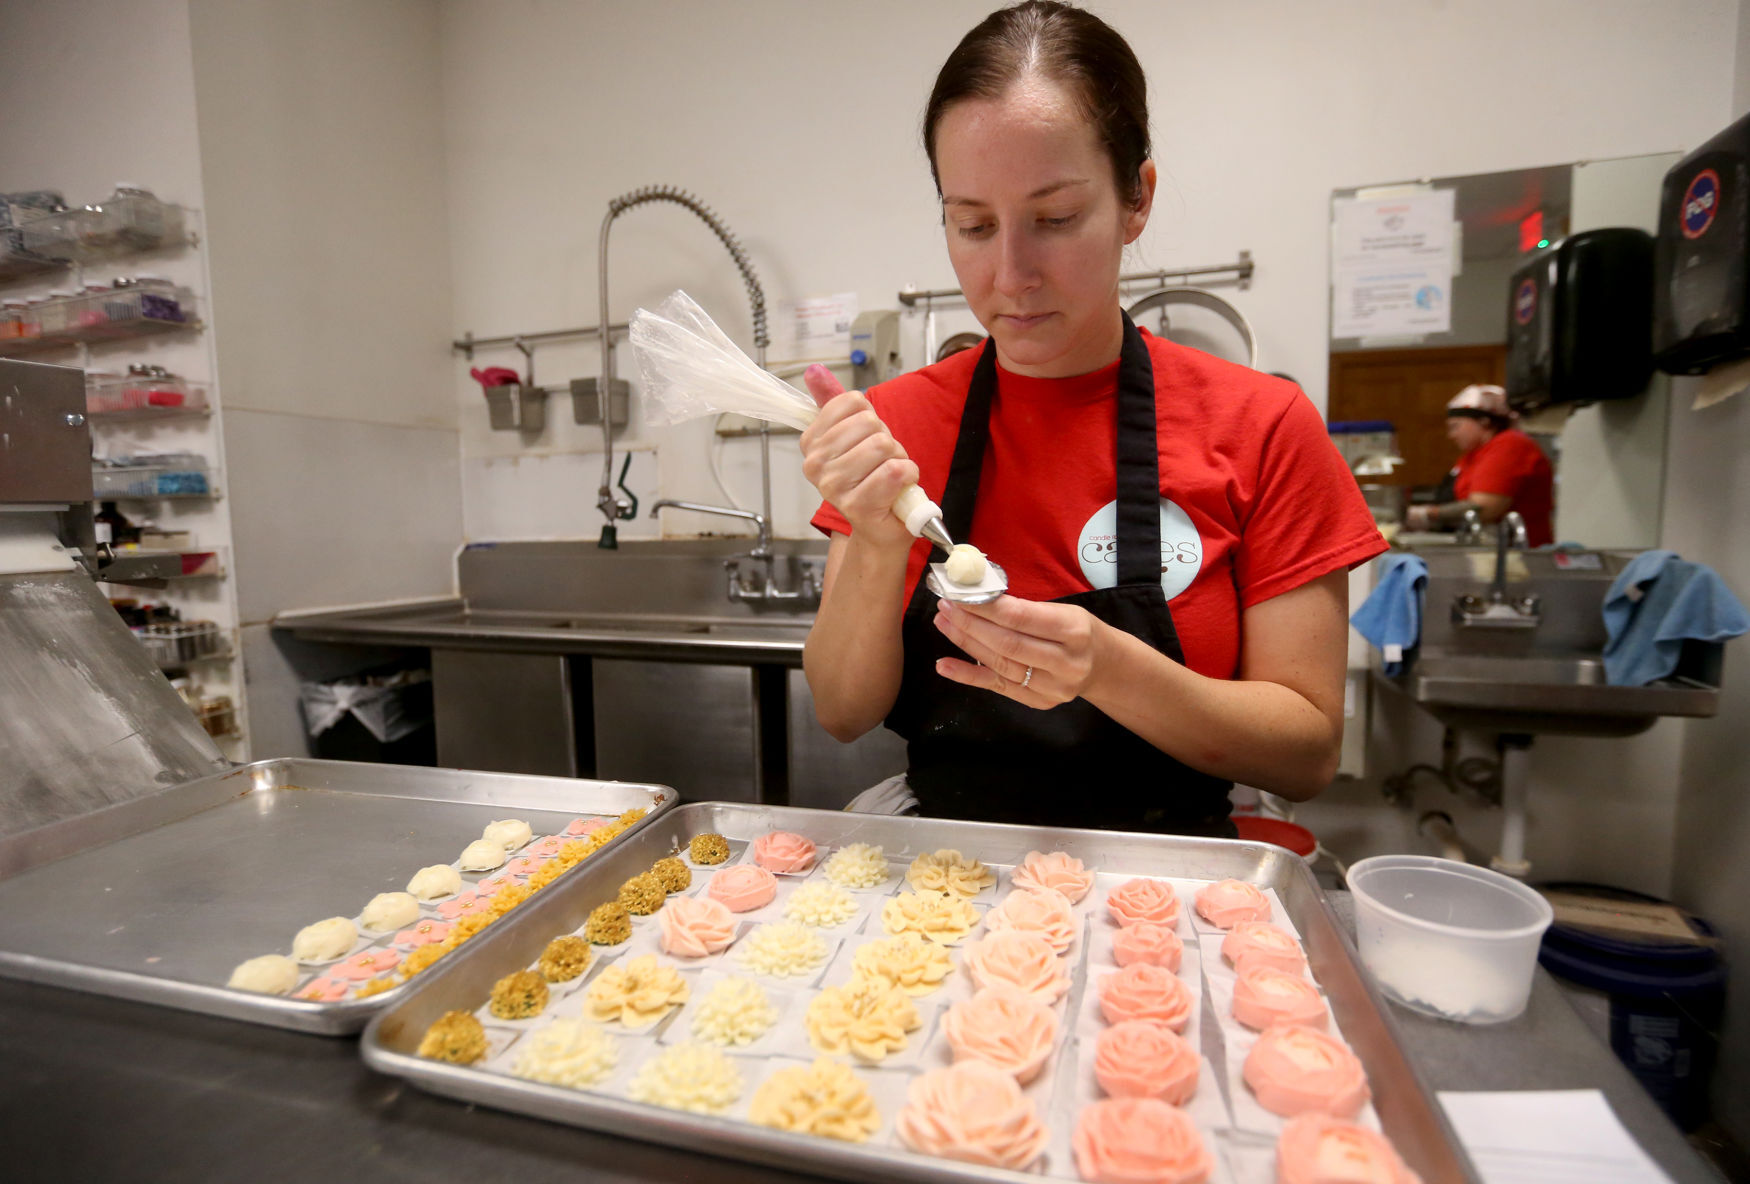 Jill Takosky prepares items at Candle Ready Cakes in Dubuque on Thursday, June 23, 2022. The store plans to move to a new, larger location at 249 W. First St. in Dubuque.    PHOTO CREDIT: JESSICA REILLY